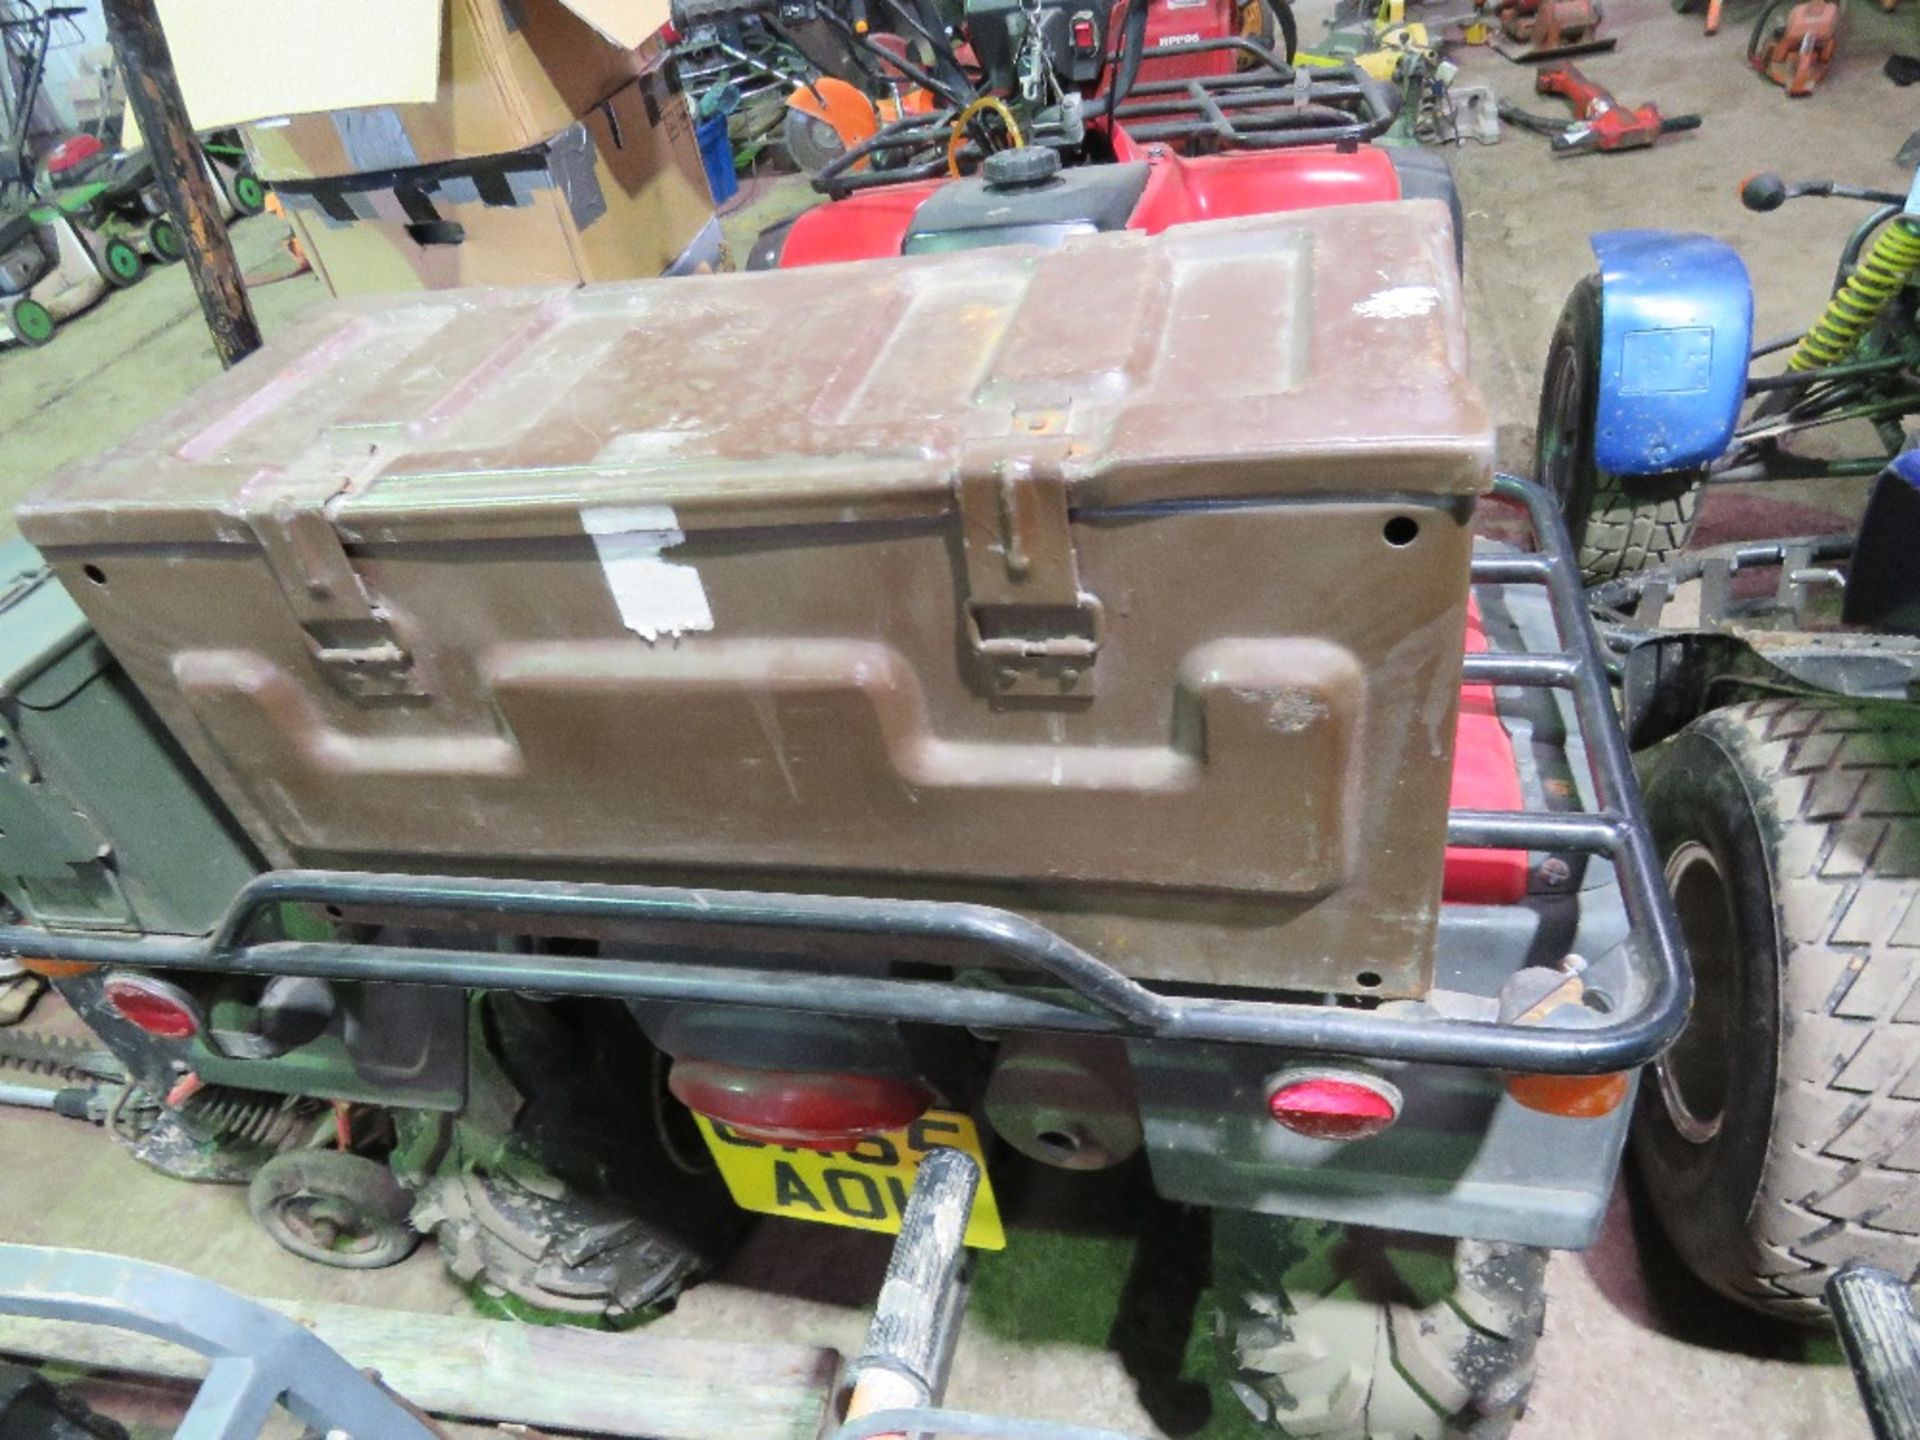 LONCIN 2WD QUAD BIKE, REG:GX55 AOH WITH V5 AND HAND BOOK ETC. WHEN TESTED WAS SEEN TO RUN, DRIVE, ST - Image 3 of 5